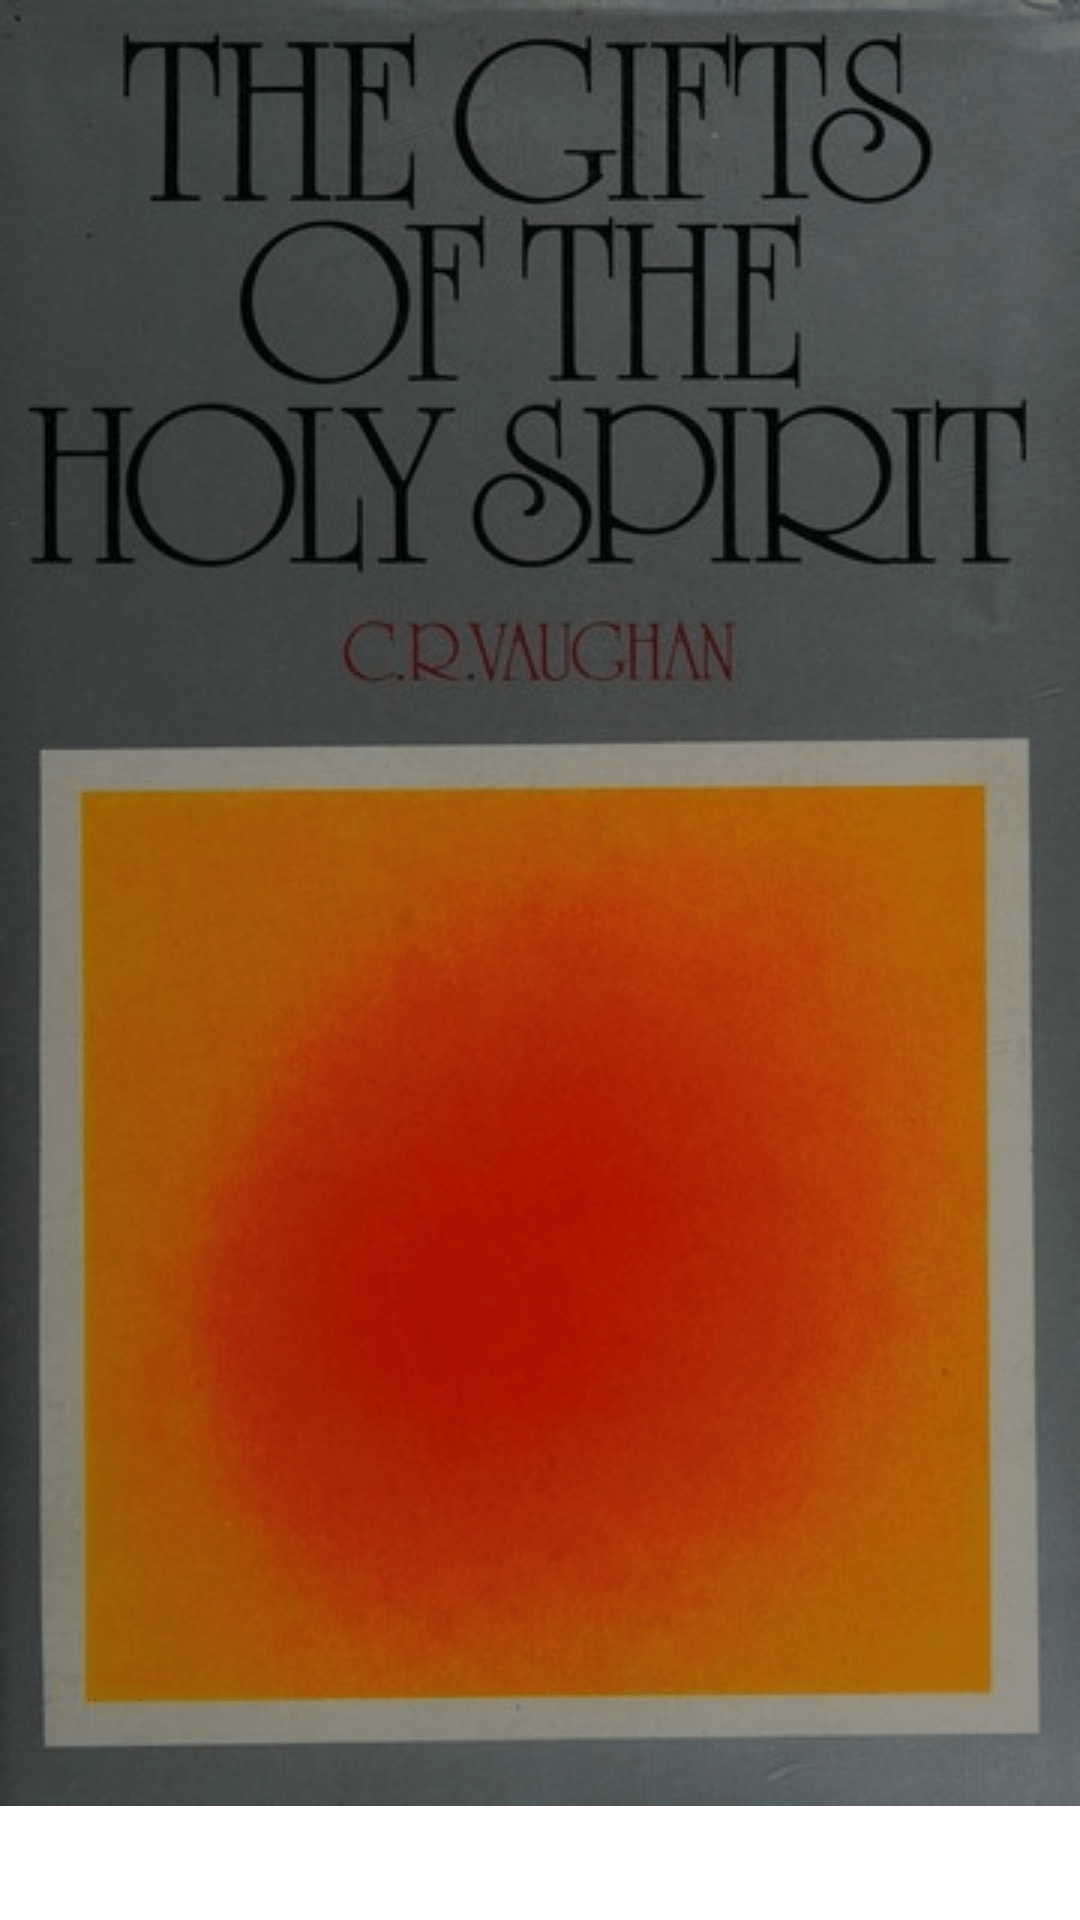 The Gifts of the Holy Spirit by C.R. Vaughan